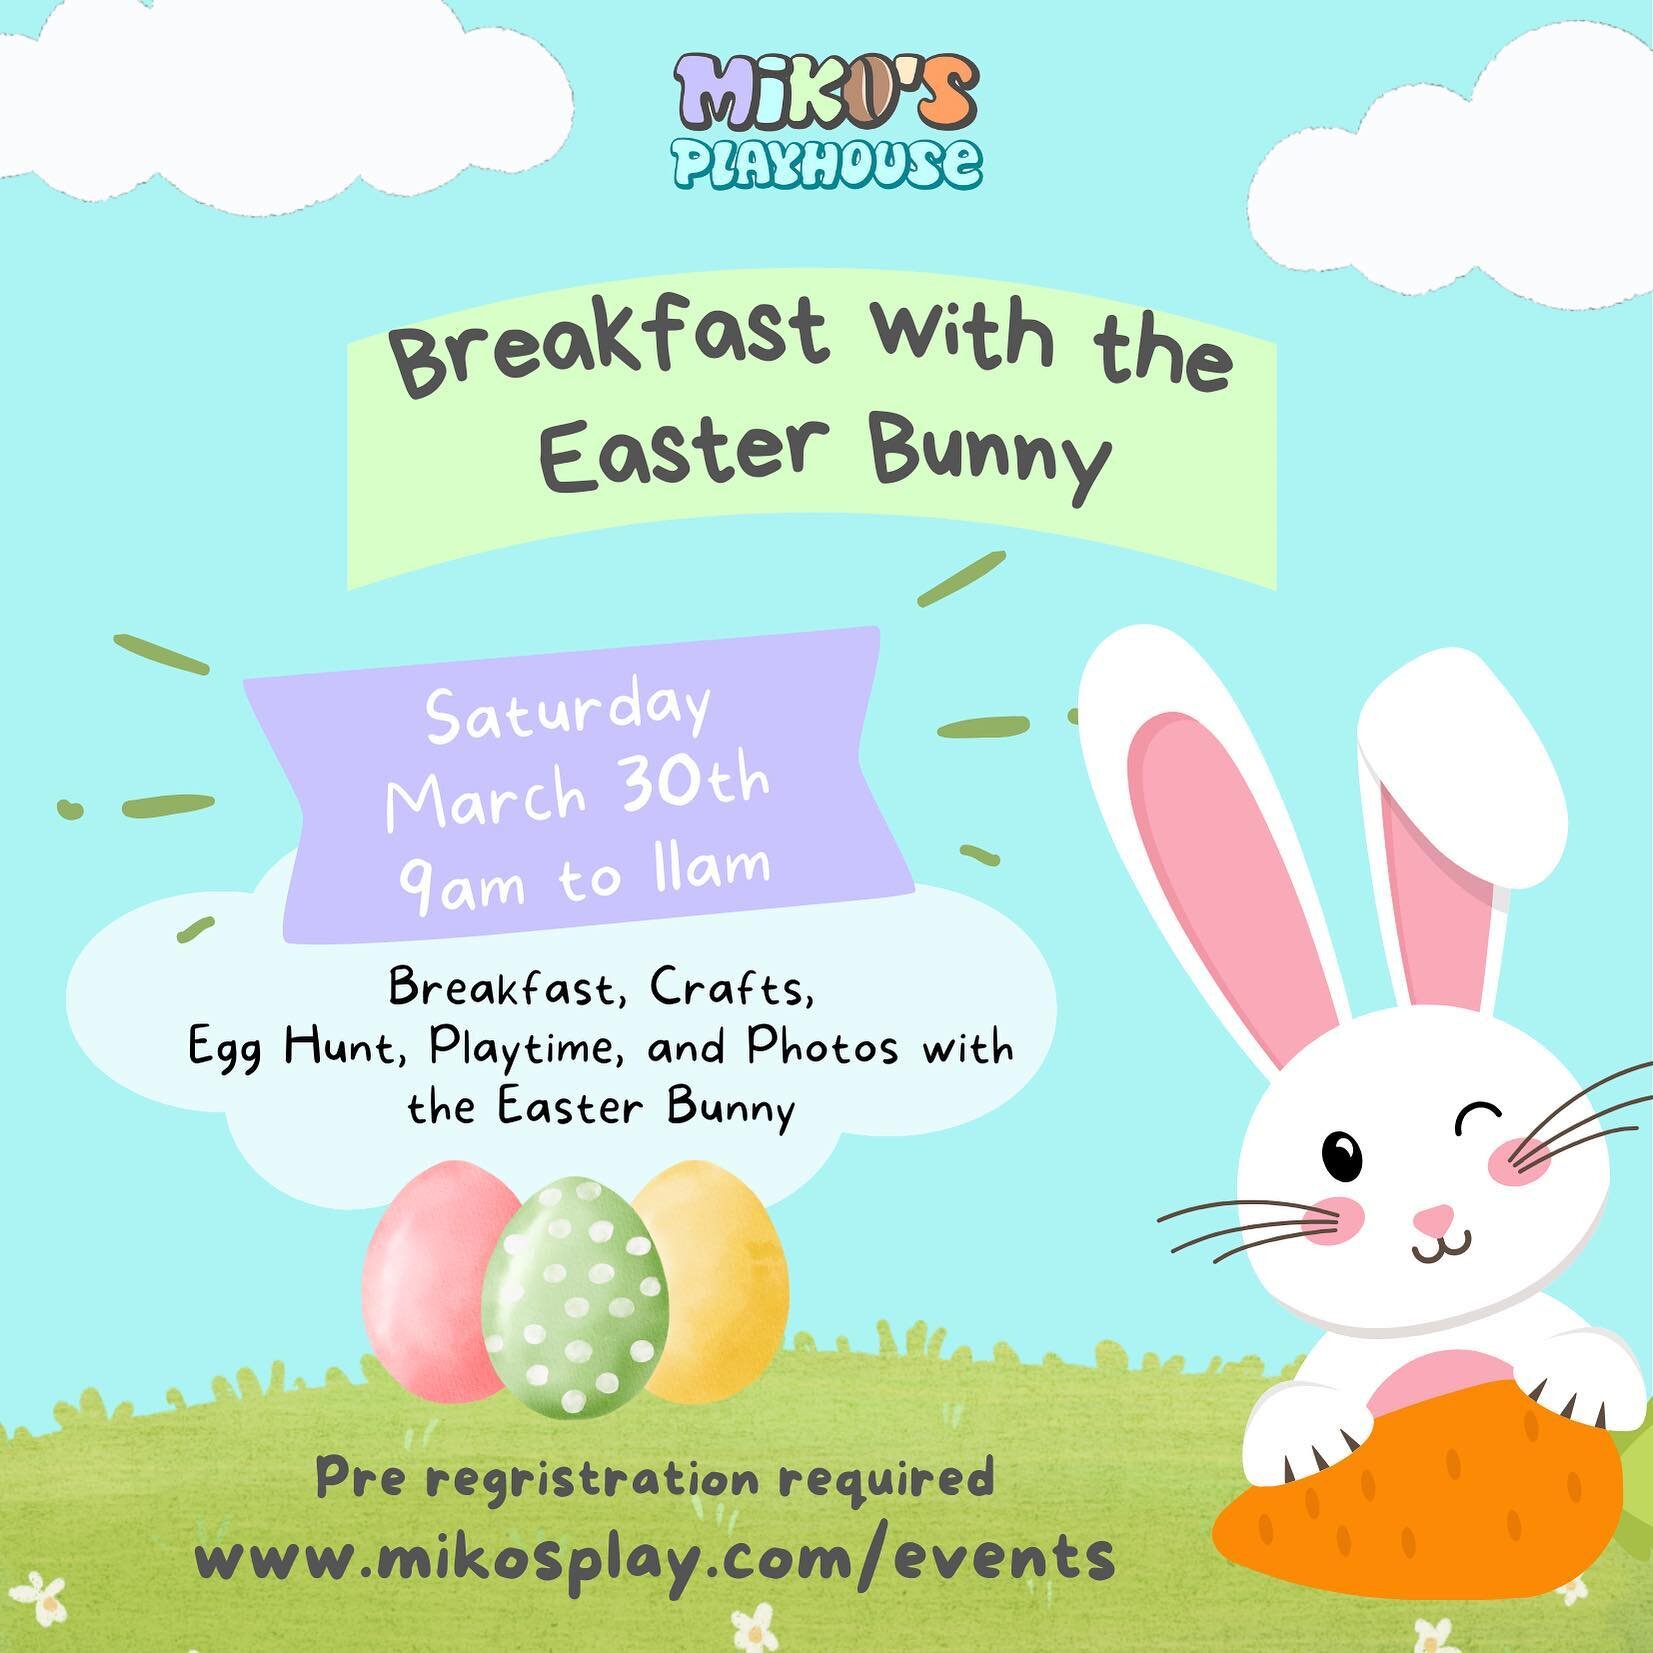 Join us for a hoppy breakfast with the Easter Bunny! 🐰🥞 Enjoy a delightful morning filled with delicious treats, fun activities, and of course, a special visit from the Easter Bunny himself! Limited spots available, reserve yours today! www.mikospl